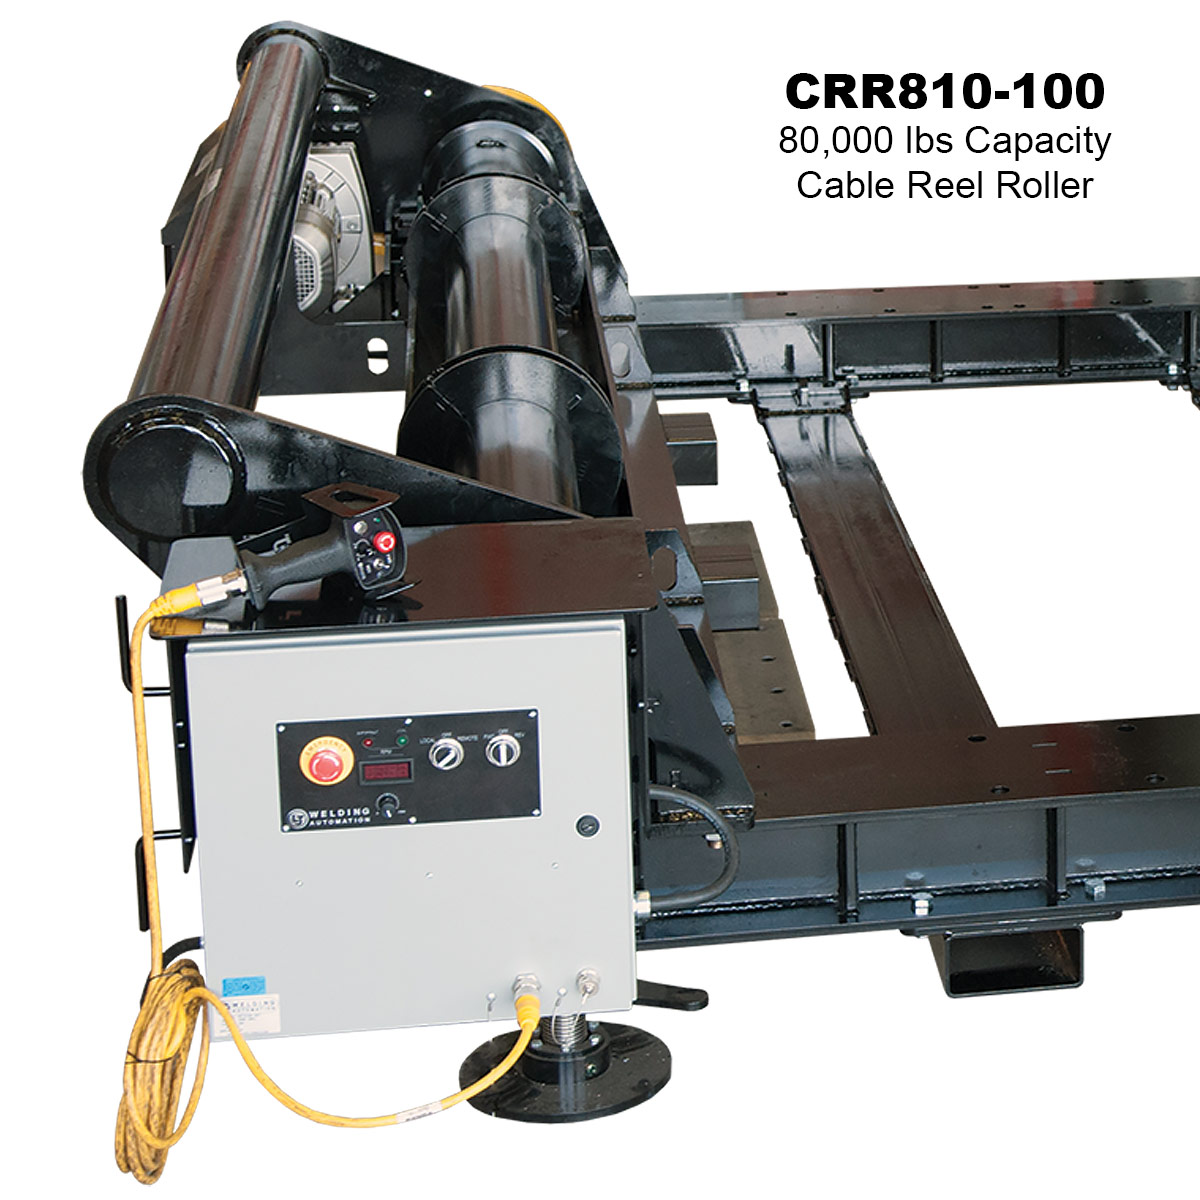 02-80000lbs-Cable-Reel-Roller